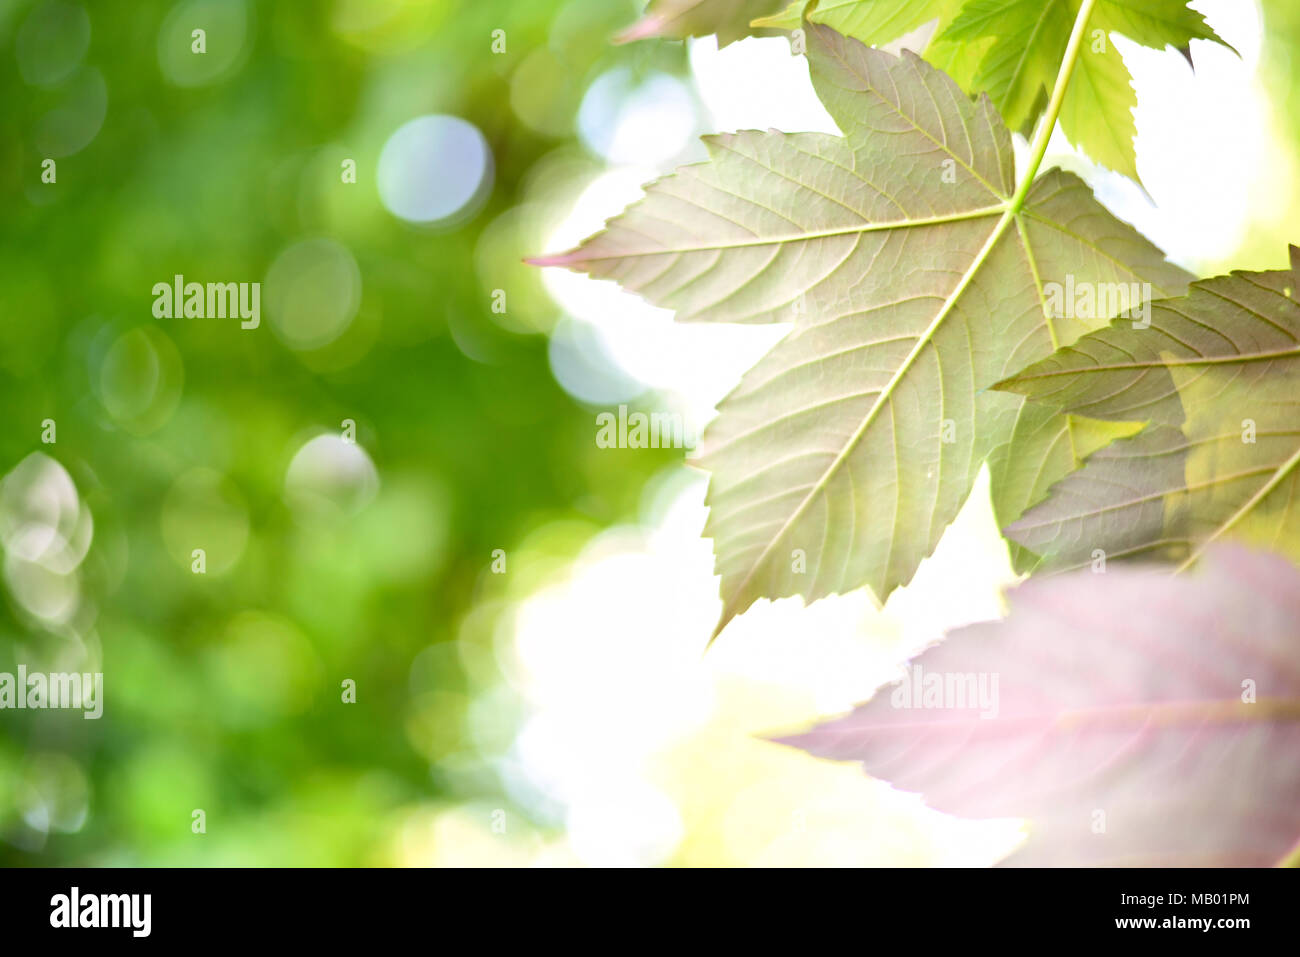 Green leaves background or spring background with sunlight and selective focus. Green mountain maple leaves in the sun with copy space. Nature frame. Stock Photo